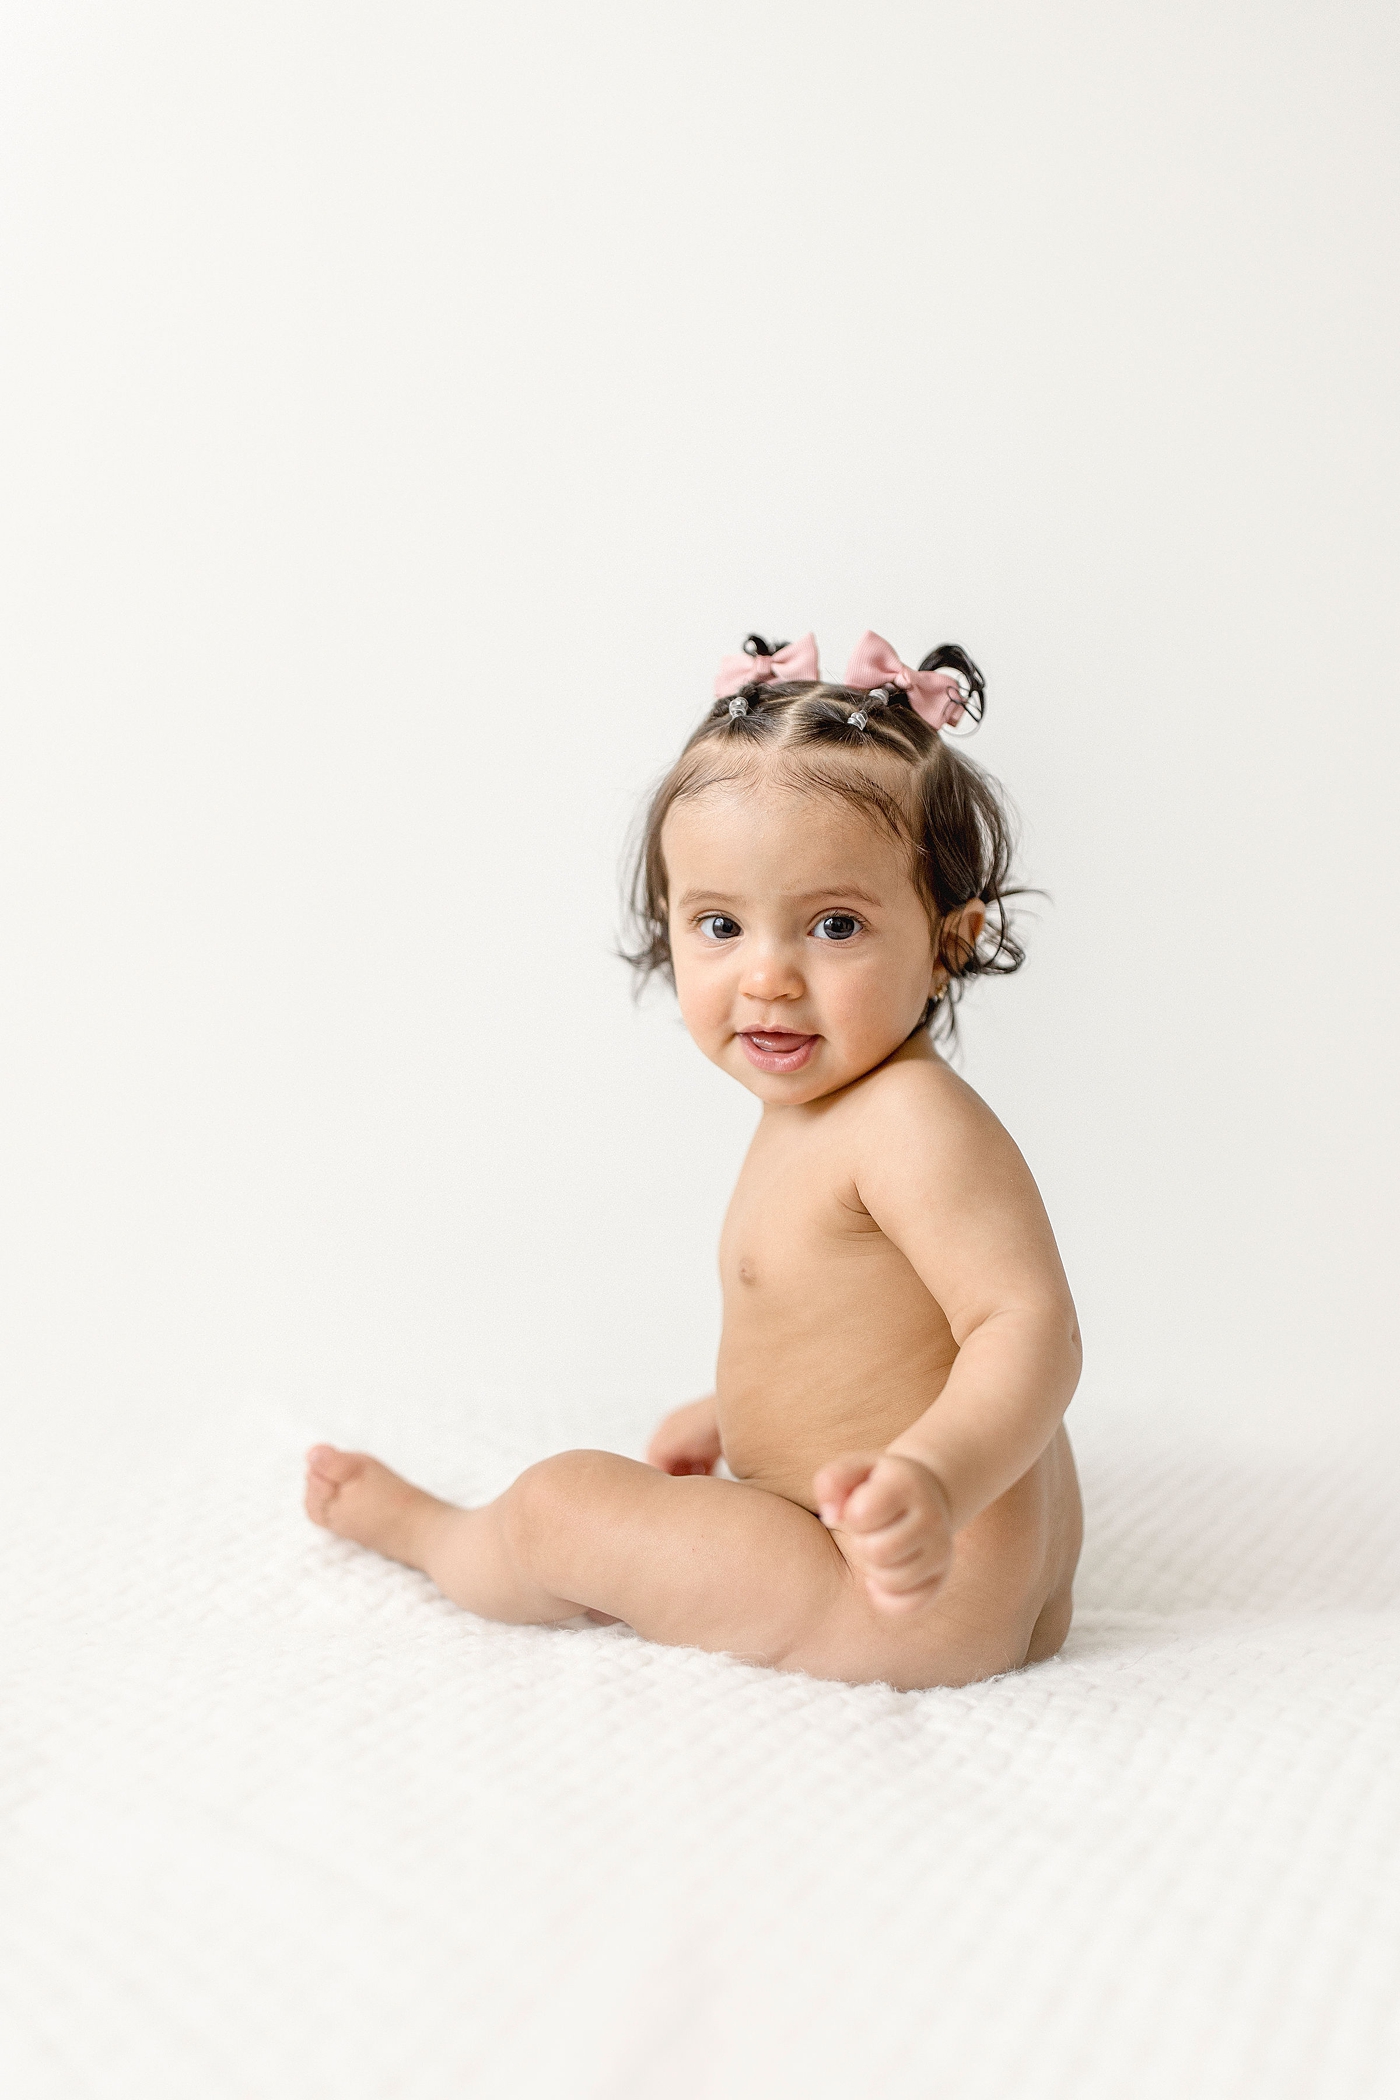 Baby girl sits unassisted during six month baby photography miami session. Photo by Ivanna Vidal Photography.